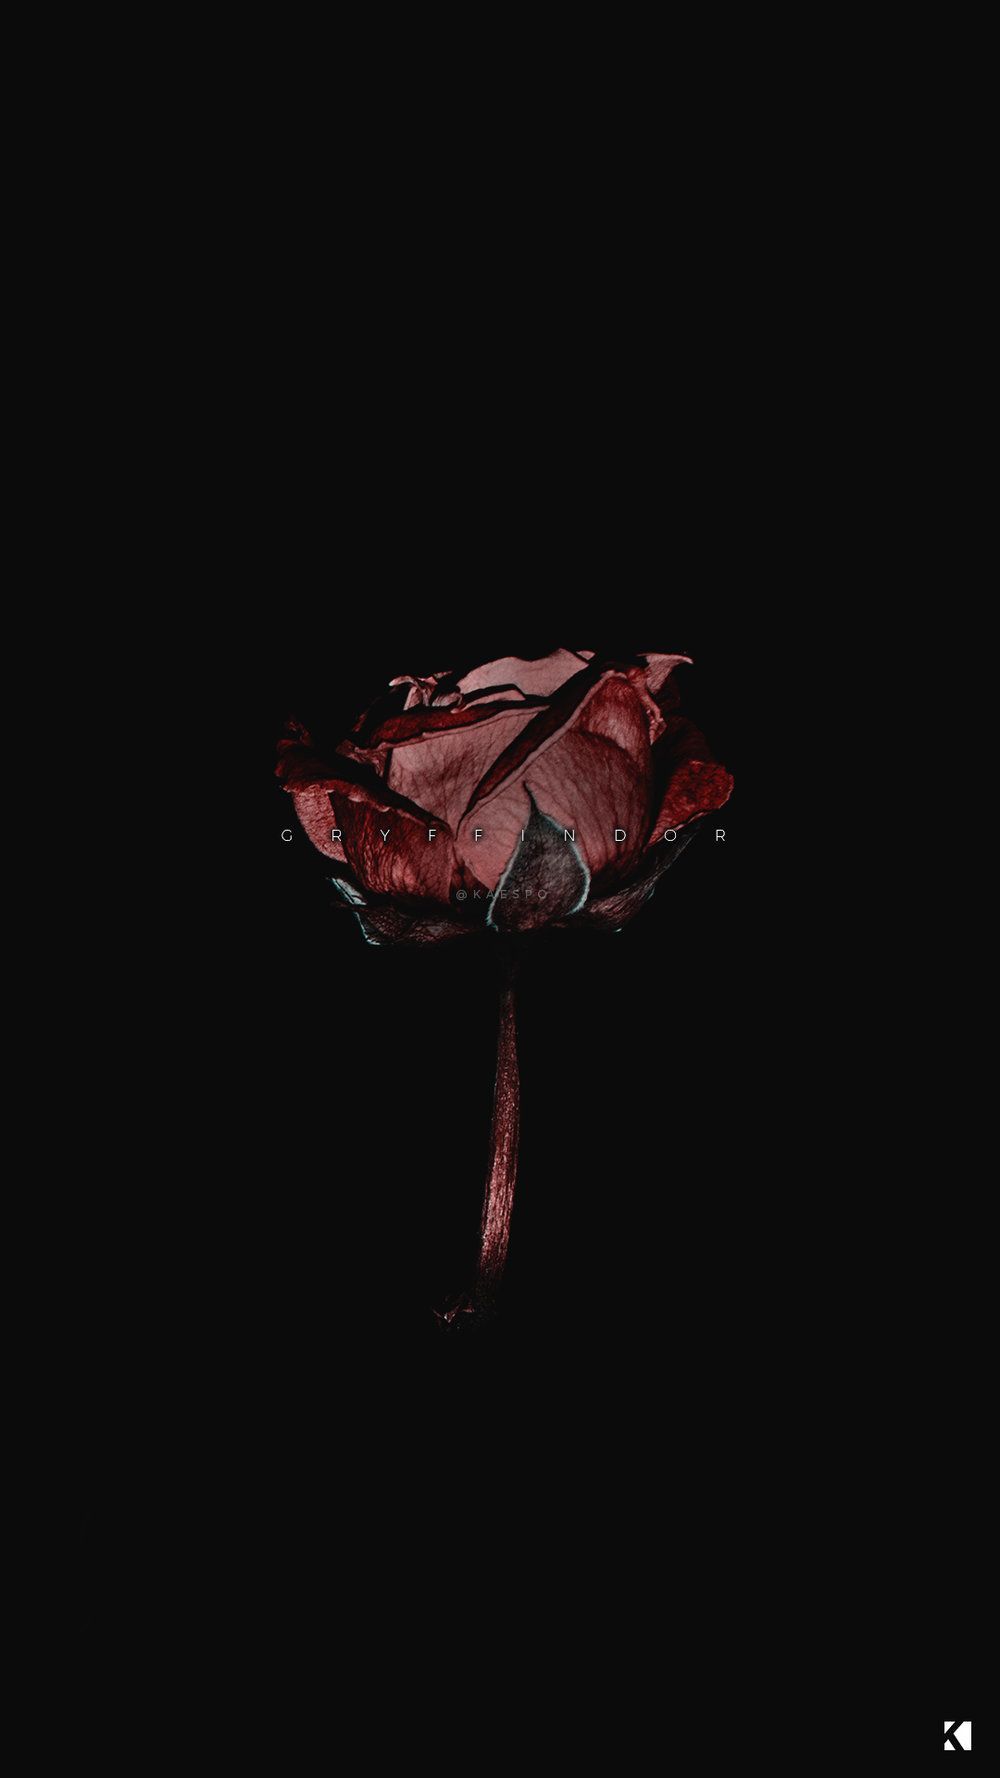 Dead Rose On Black Images Browse 22419 Stock Photos  Vectors Free  Download with Trial  Shutterstock